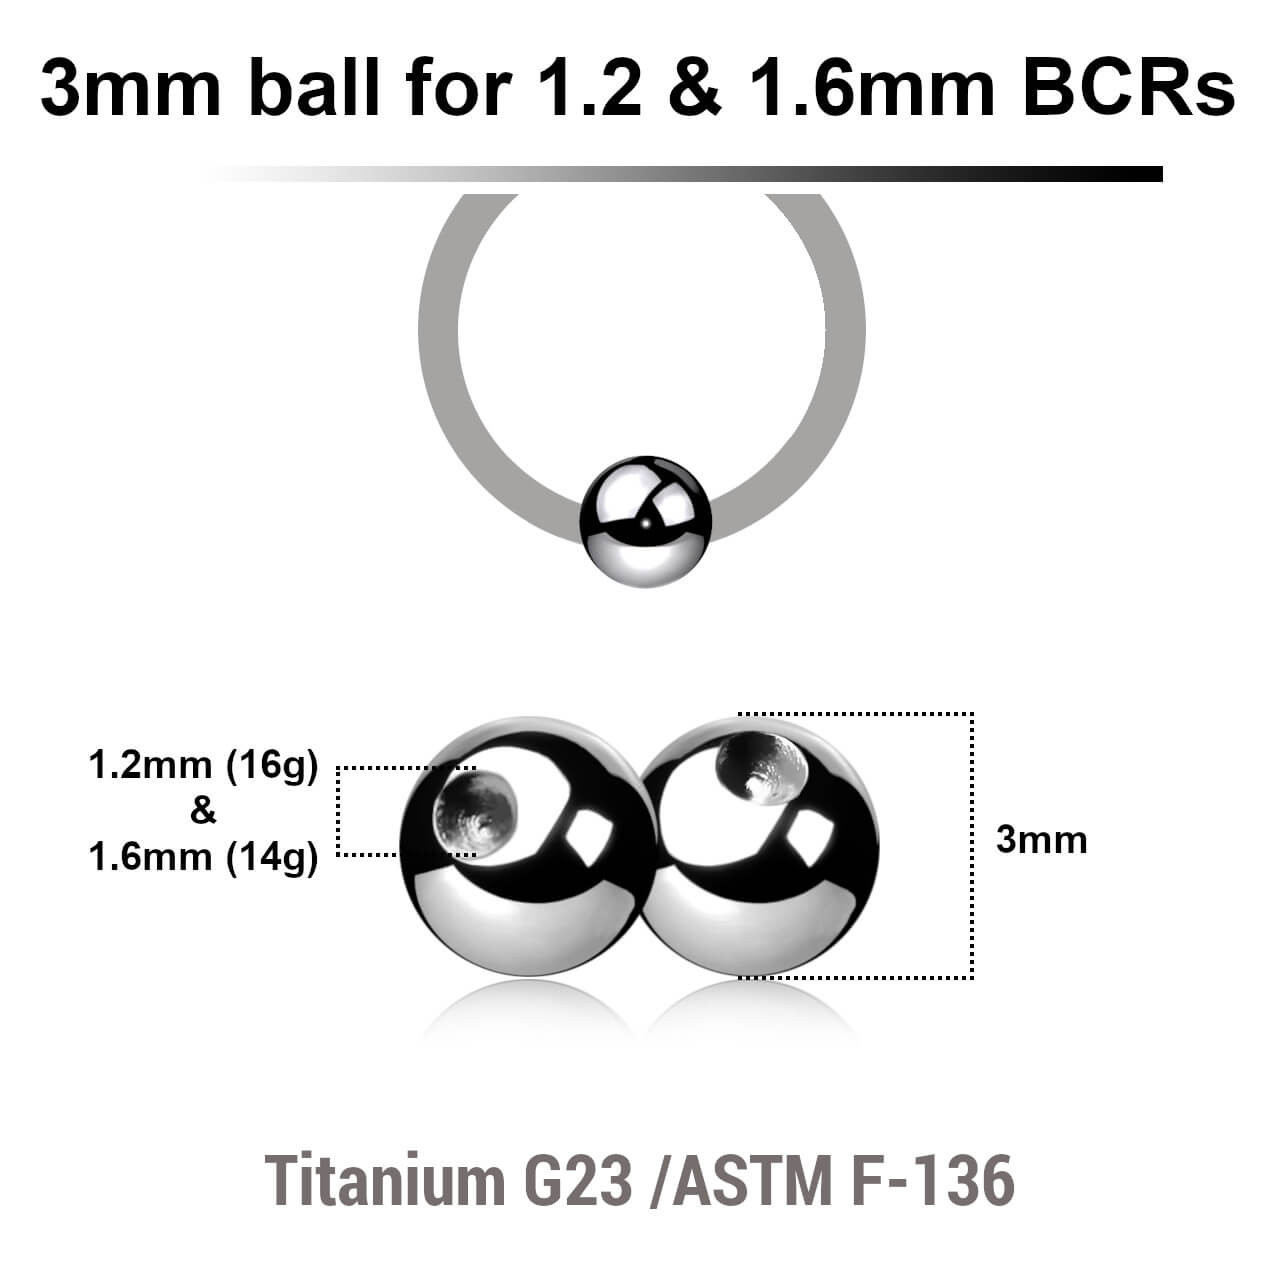 TYB12D3 Piercing studio supplies: Pack of 25 pcs. high polished titanium G23 dimple balls size 3mm for 1.2m ball closure rings